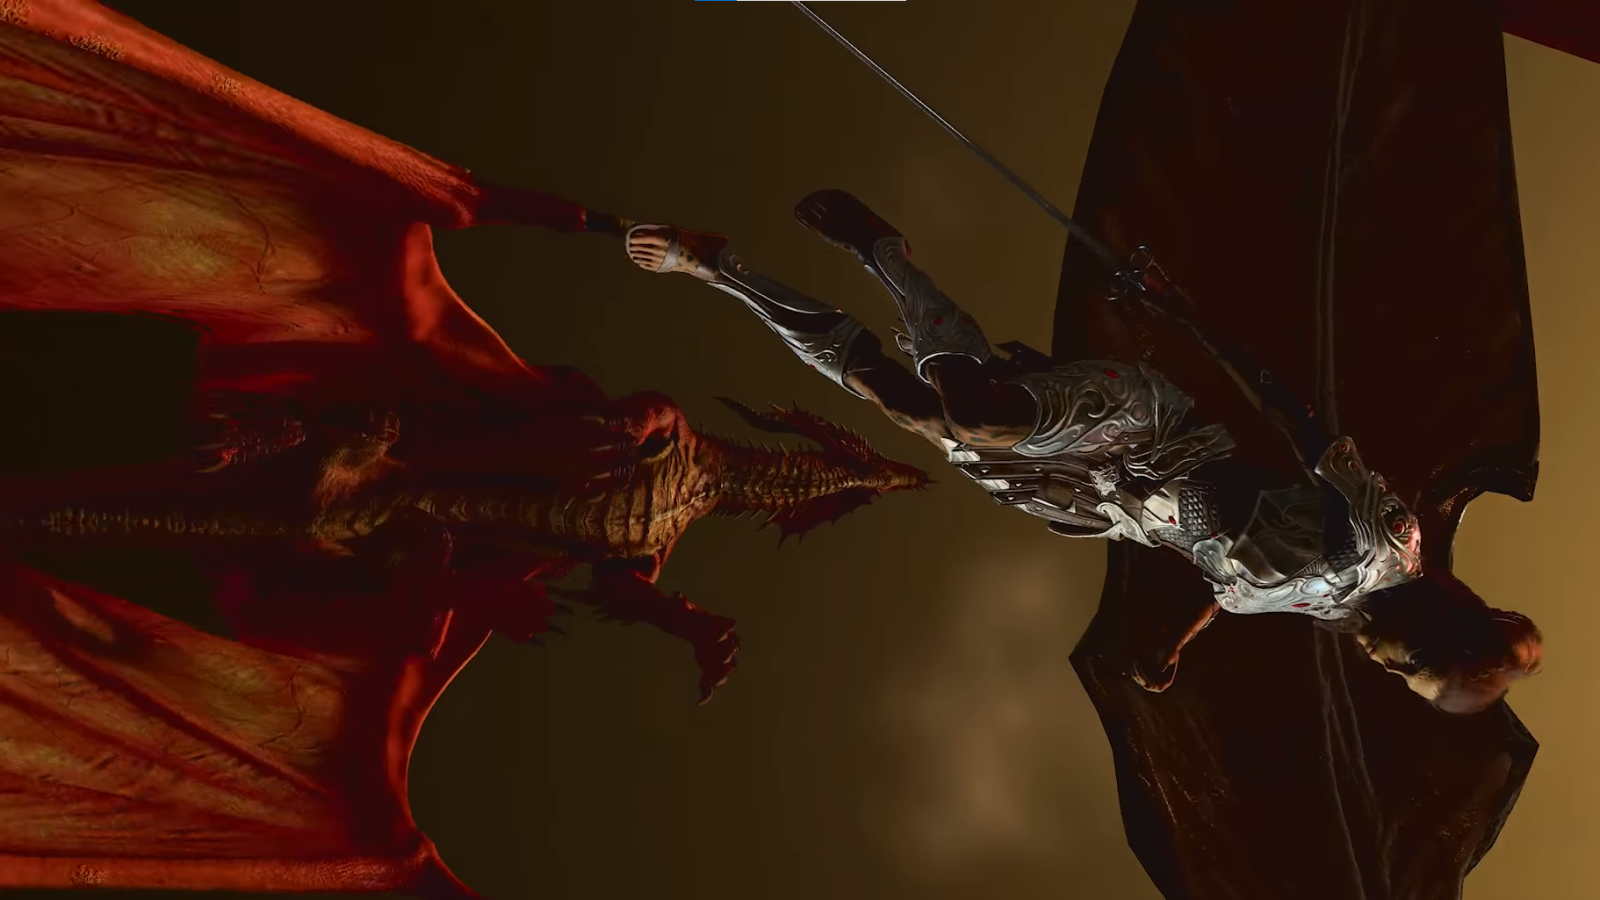 In BG3, the Githyanki Warrior Lae'zel jumps across the sky as a red dragon flies in the background. The green-skinned warrior wears metal garments that cover her torso and parts of her legs and is jumping under a supportive beam.